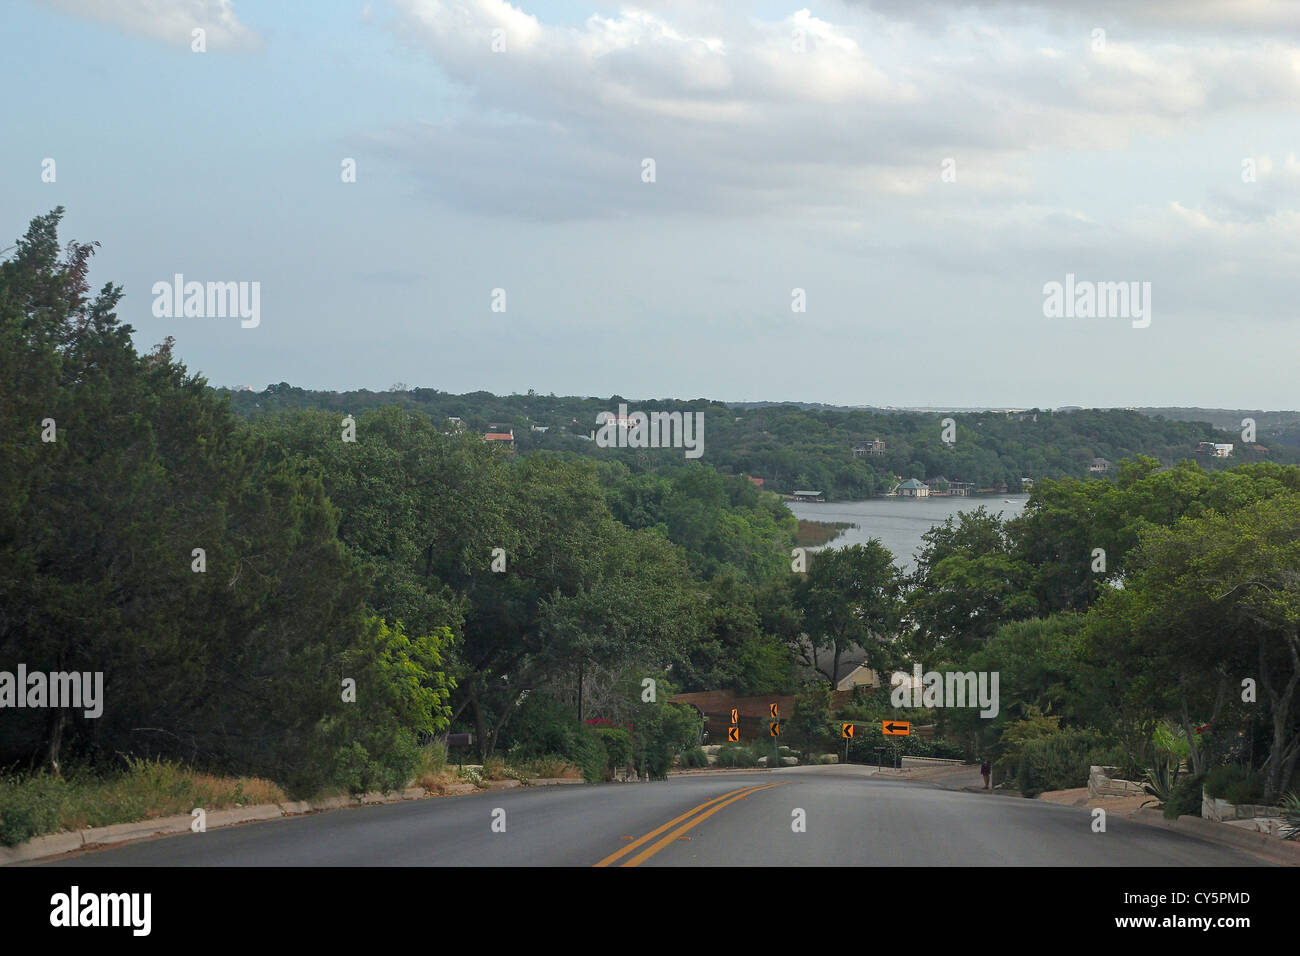 A curving road on a hill on the outskirts of Austin, Texas Stock Photo